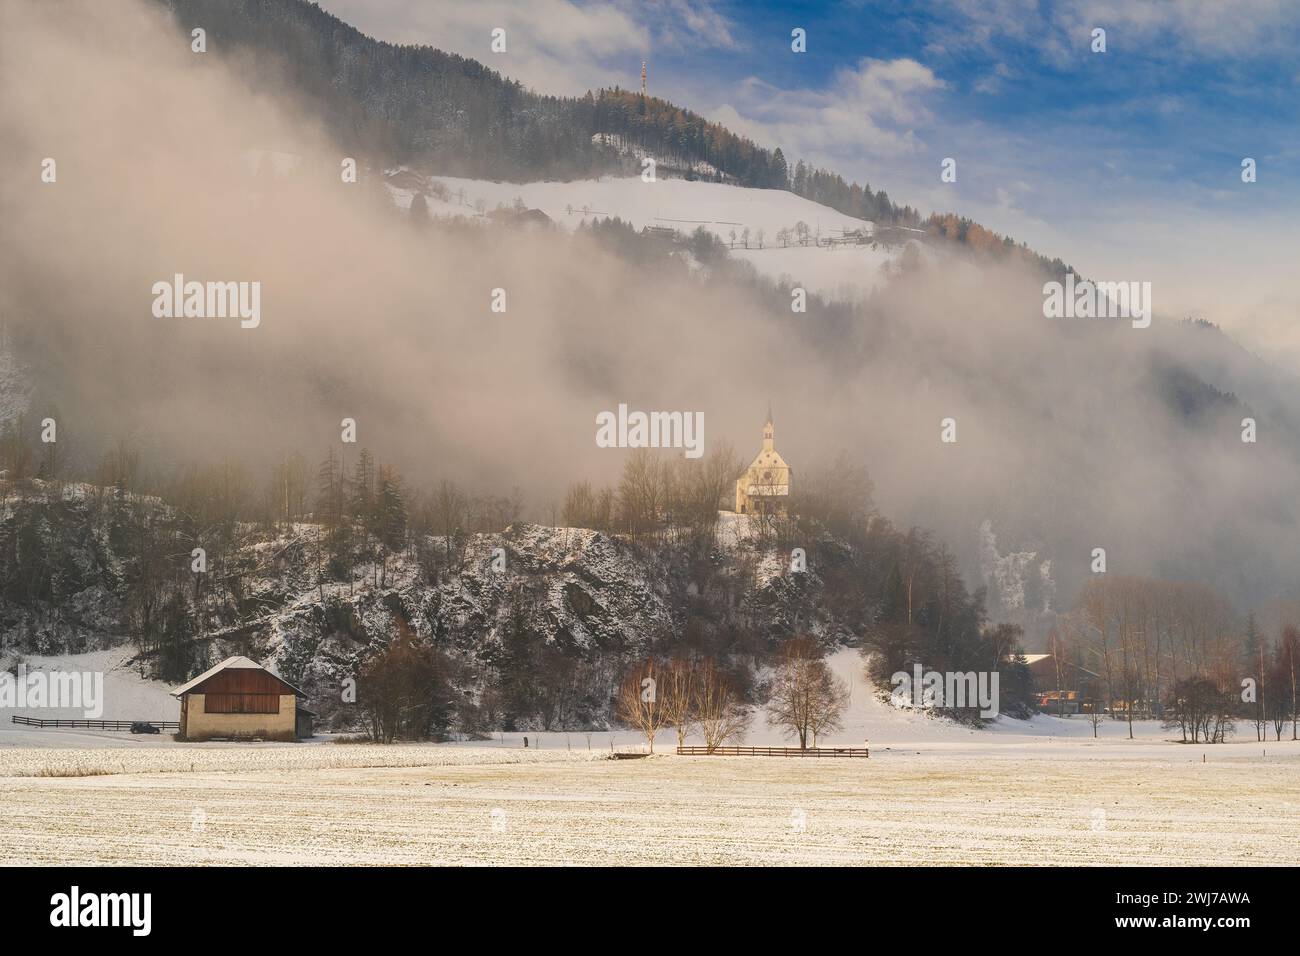 Scenic winter landscape, Freienfeld-Campo di Trens, South Tyrol, Italy Stock Photo